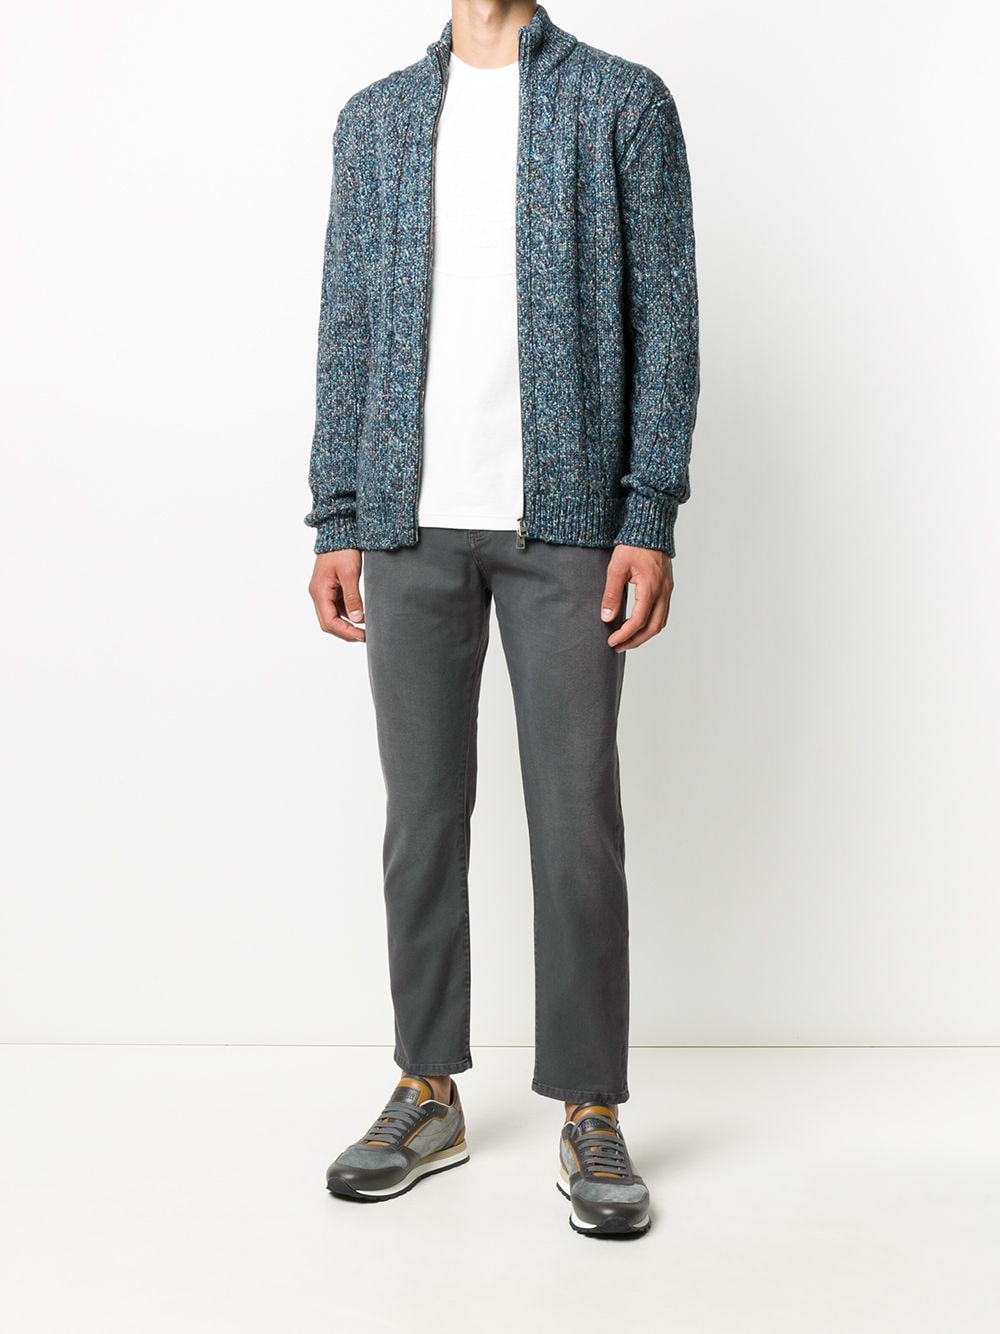 Shop ETRO bouclé-knit cardigan with Express Delivery - FARFETCH